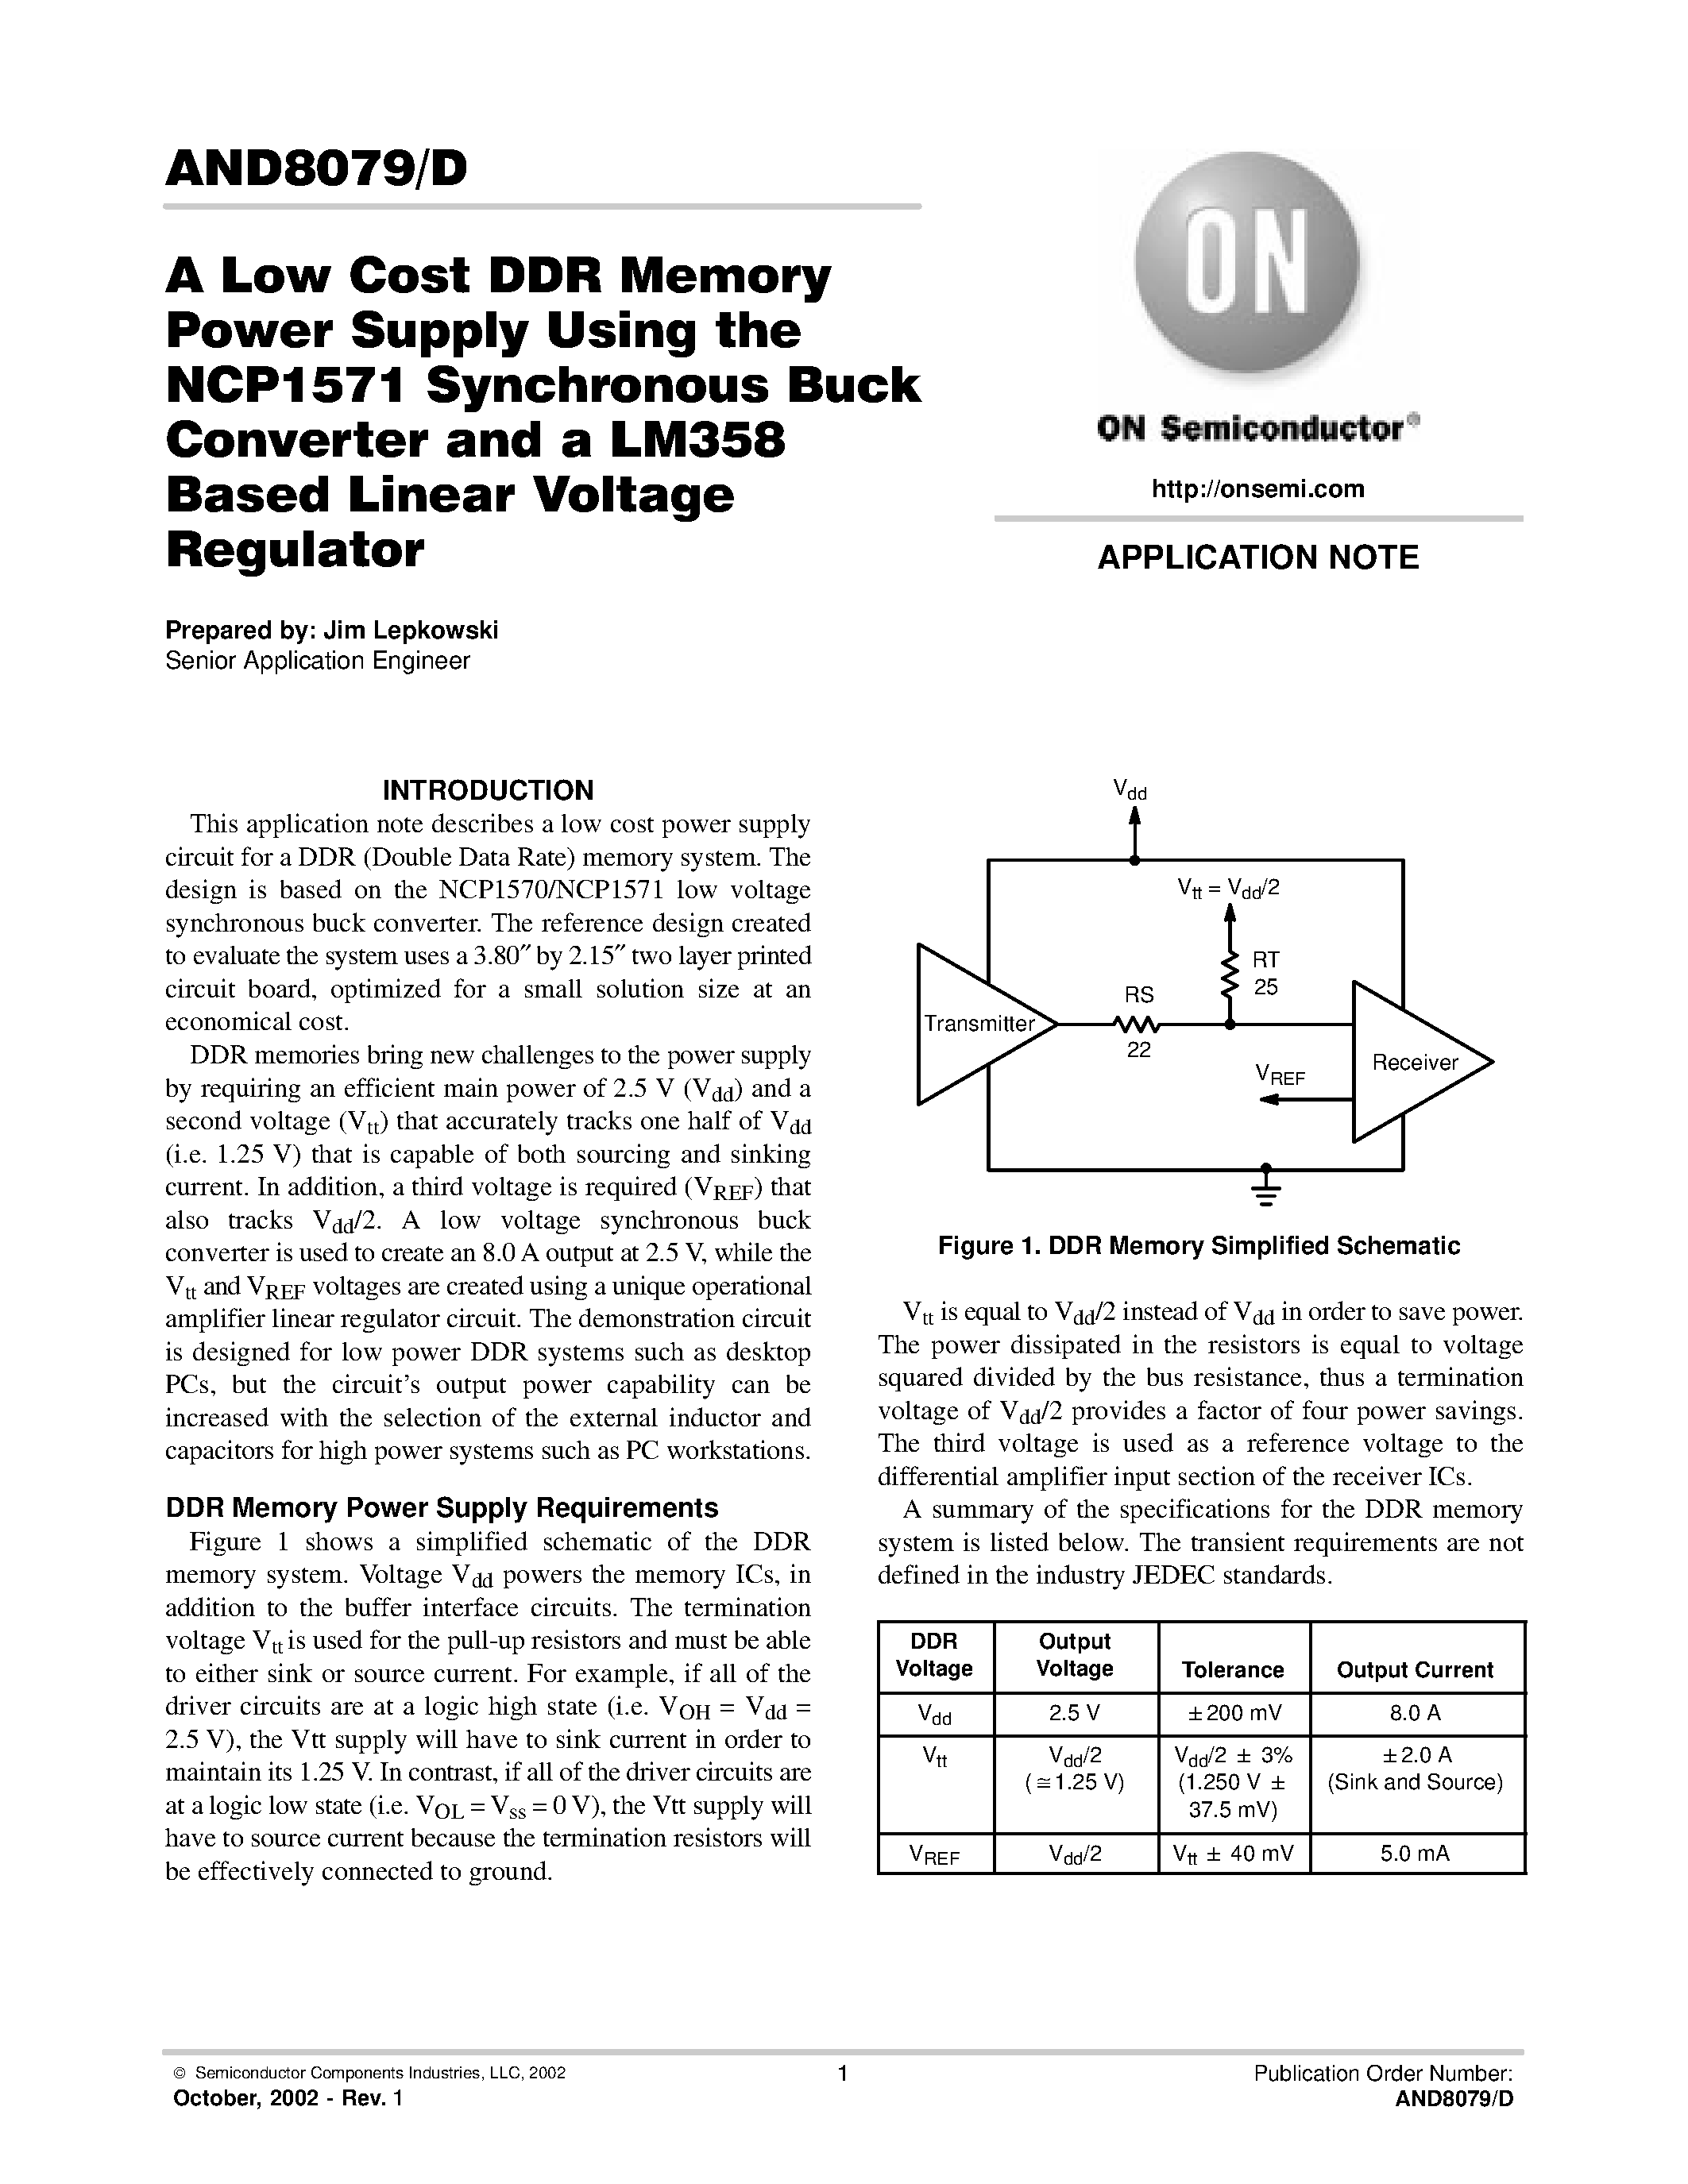 Datasheet AND8079D - A Low Cost DDR Memory Power Supply Using the NCP1571 Synchronous Buck Converter and a LM358 Based Linear Voltage Regulator page 1